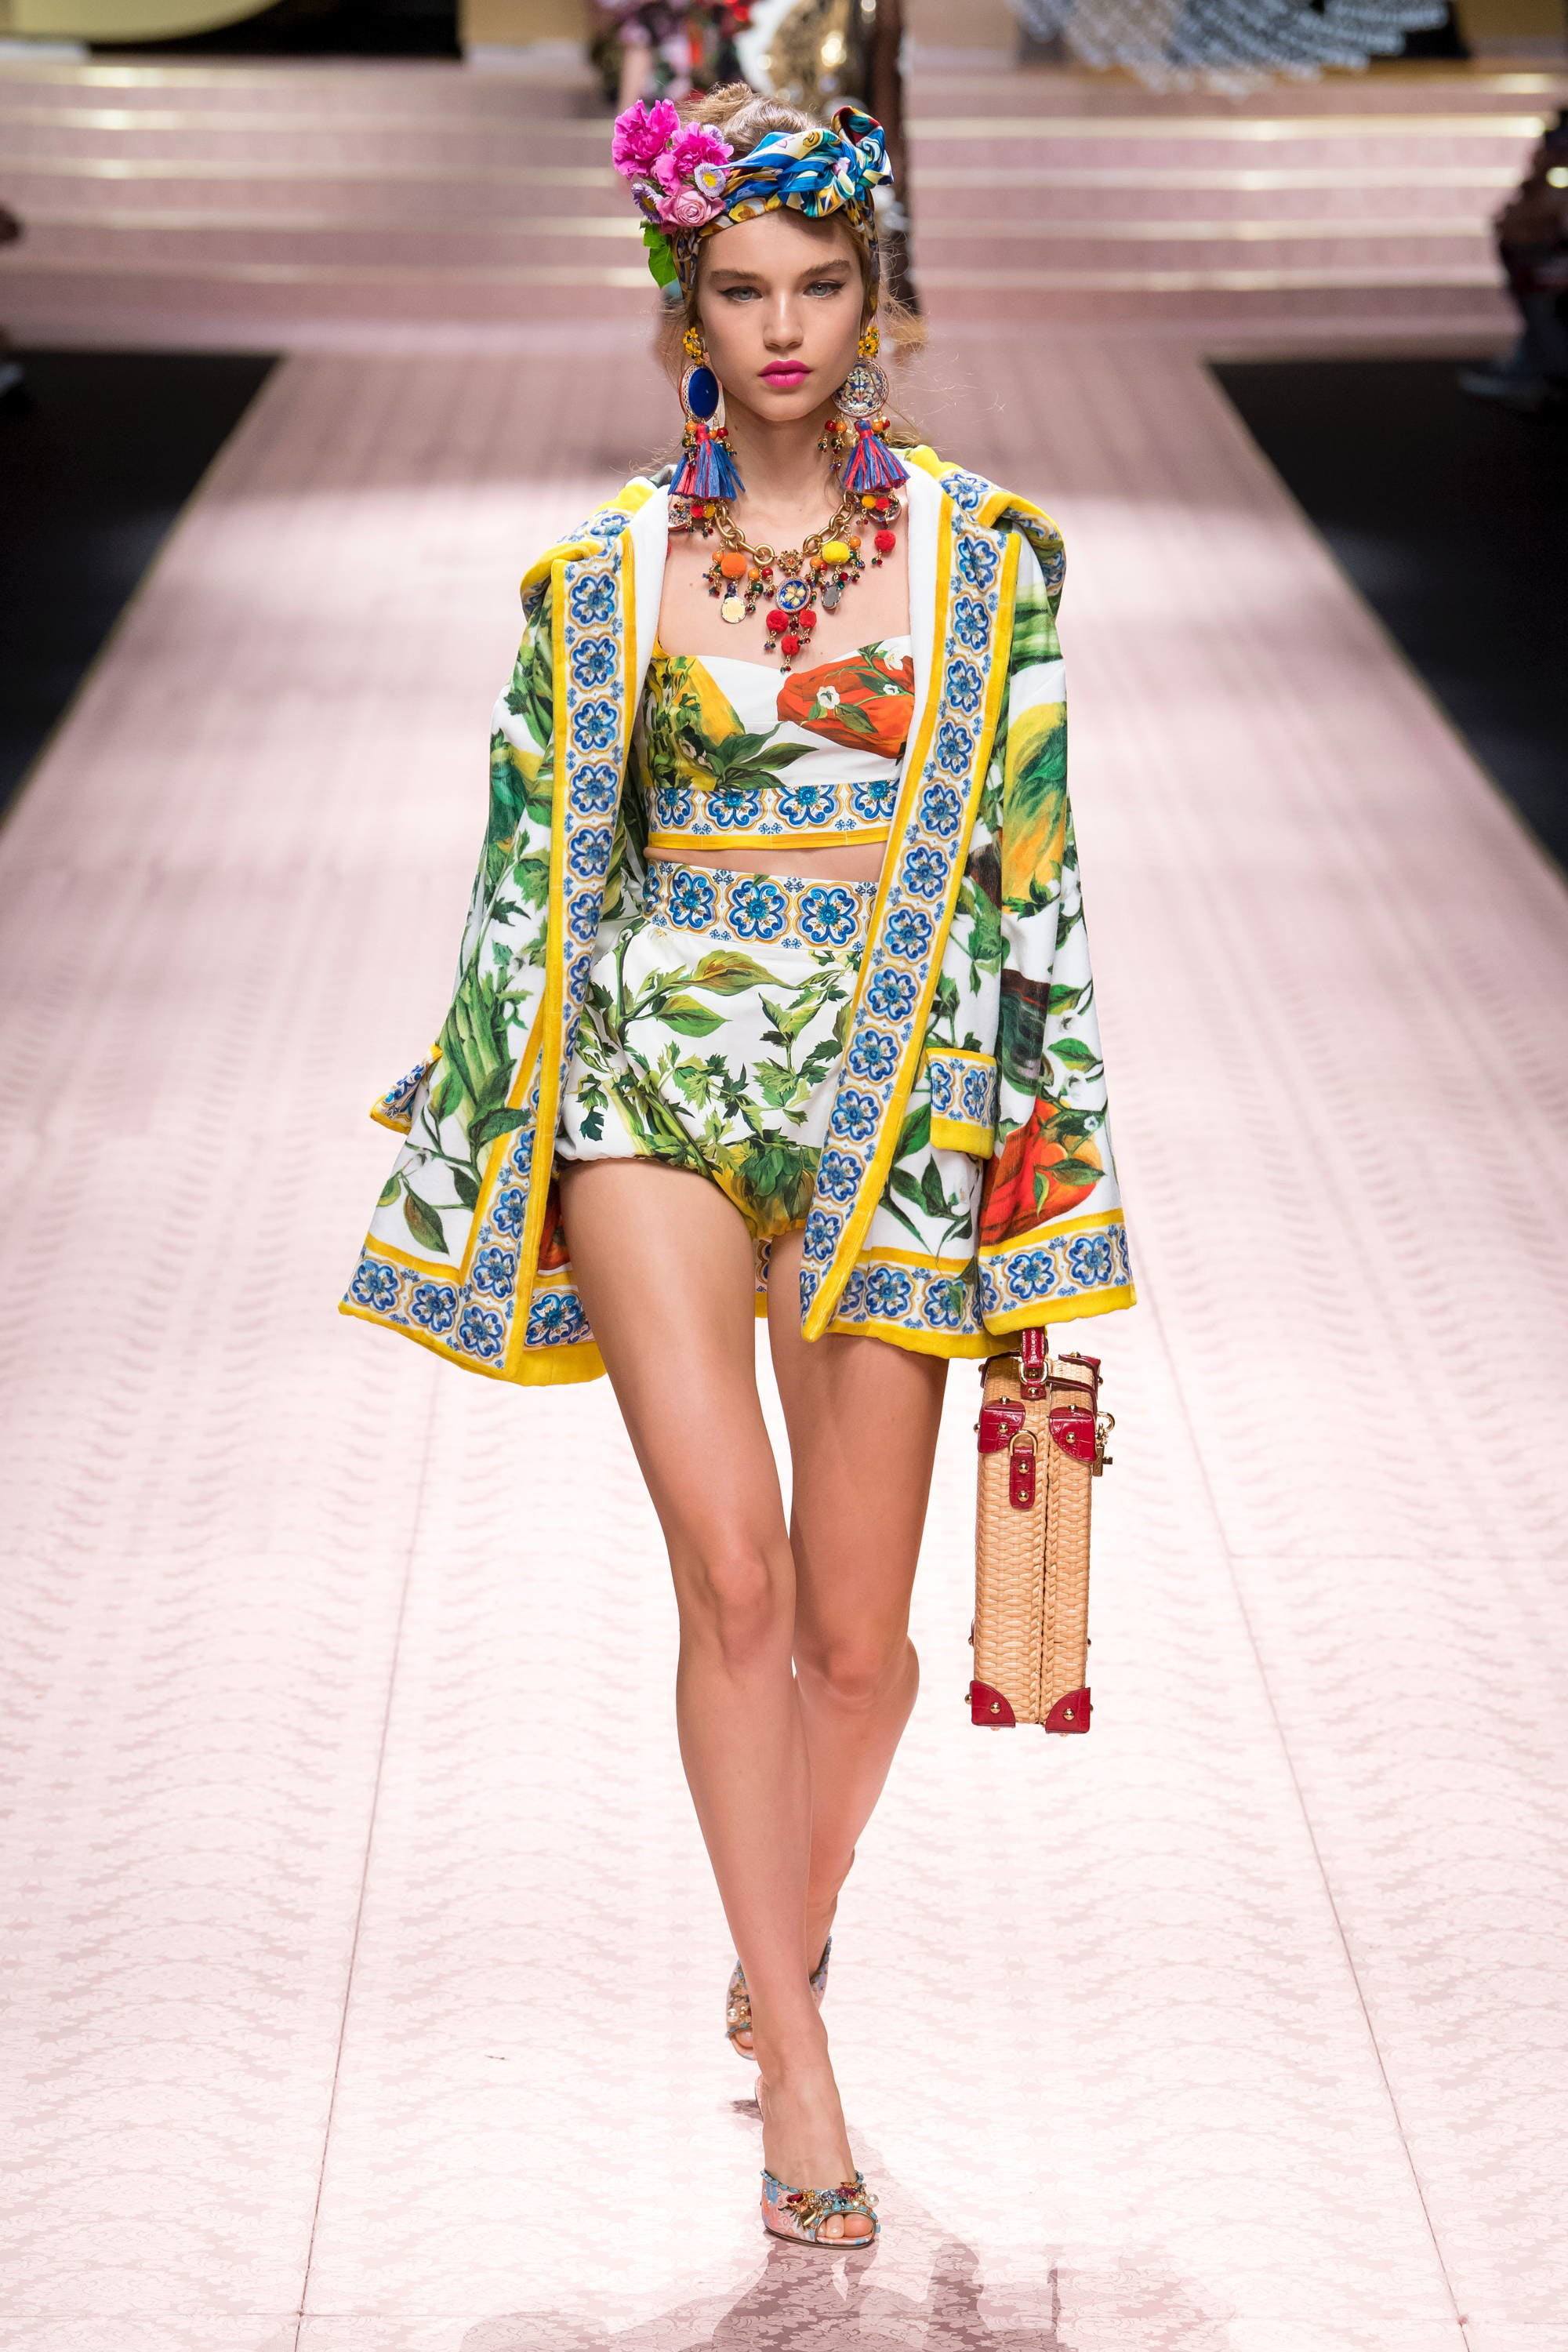 A look from Dolce & Gabbana's Spring 2019